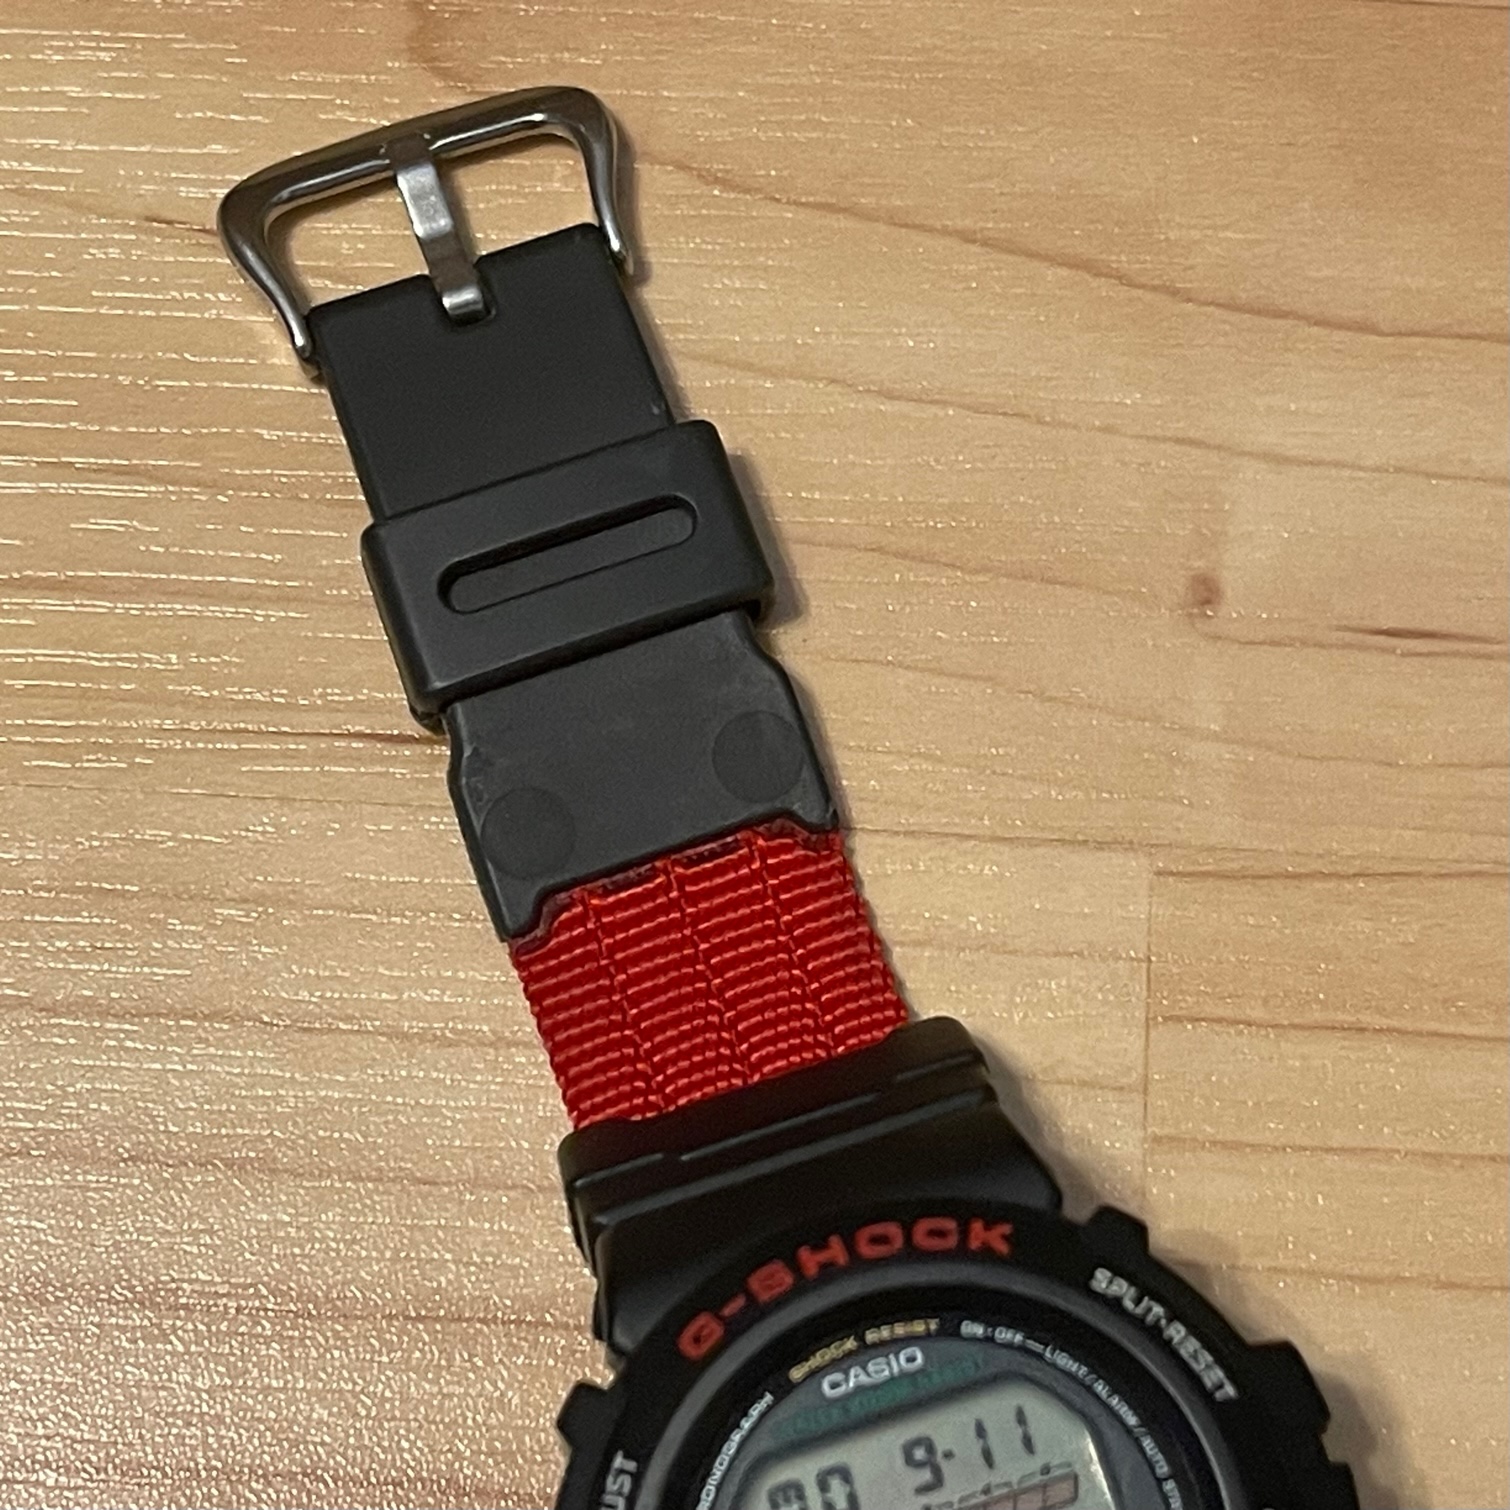 Casio Dive Watch With Red and Black Nylon Strap, the Diablo Diver 